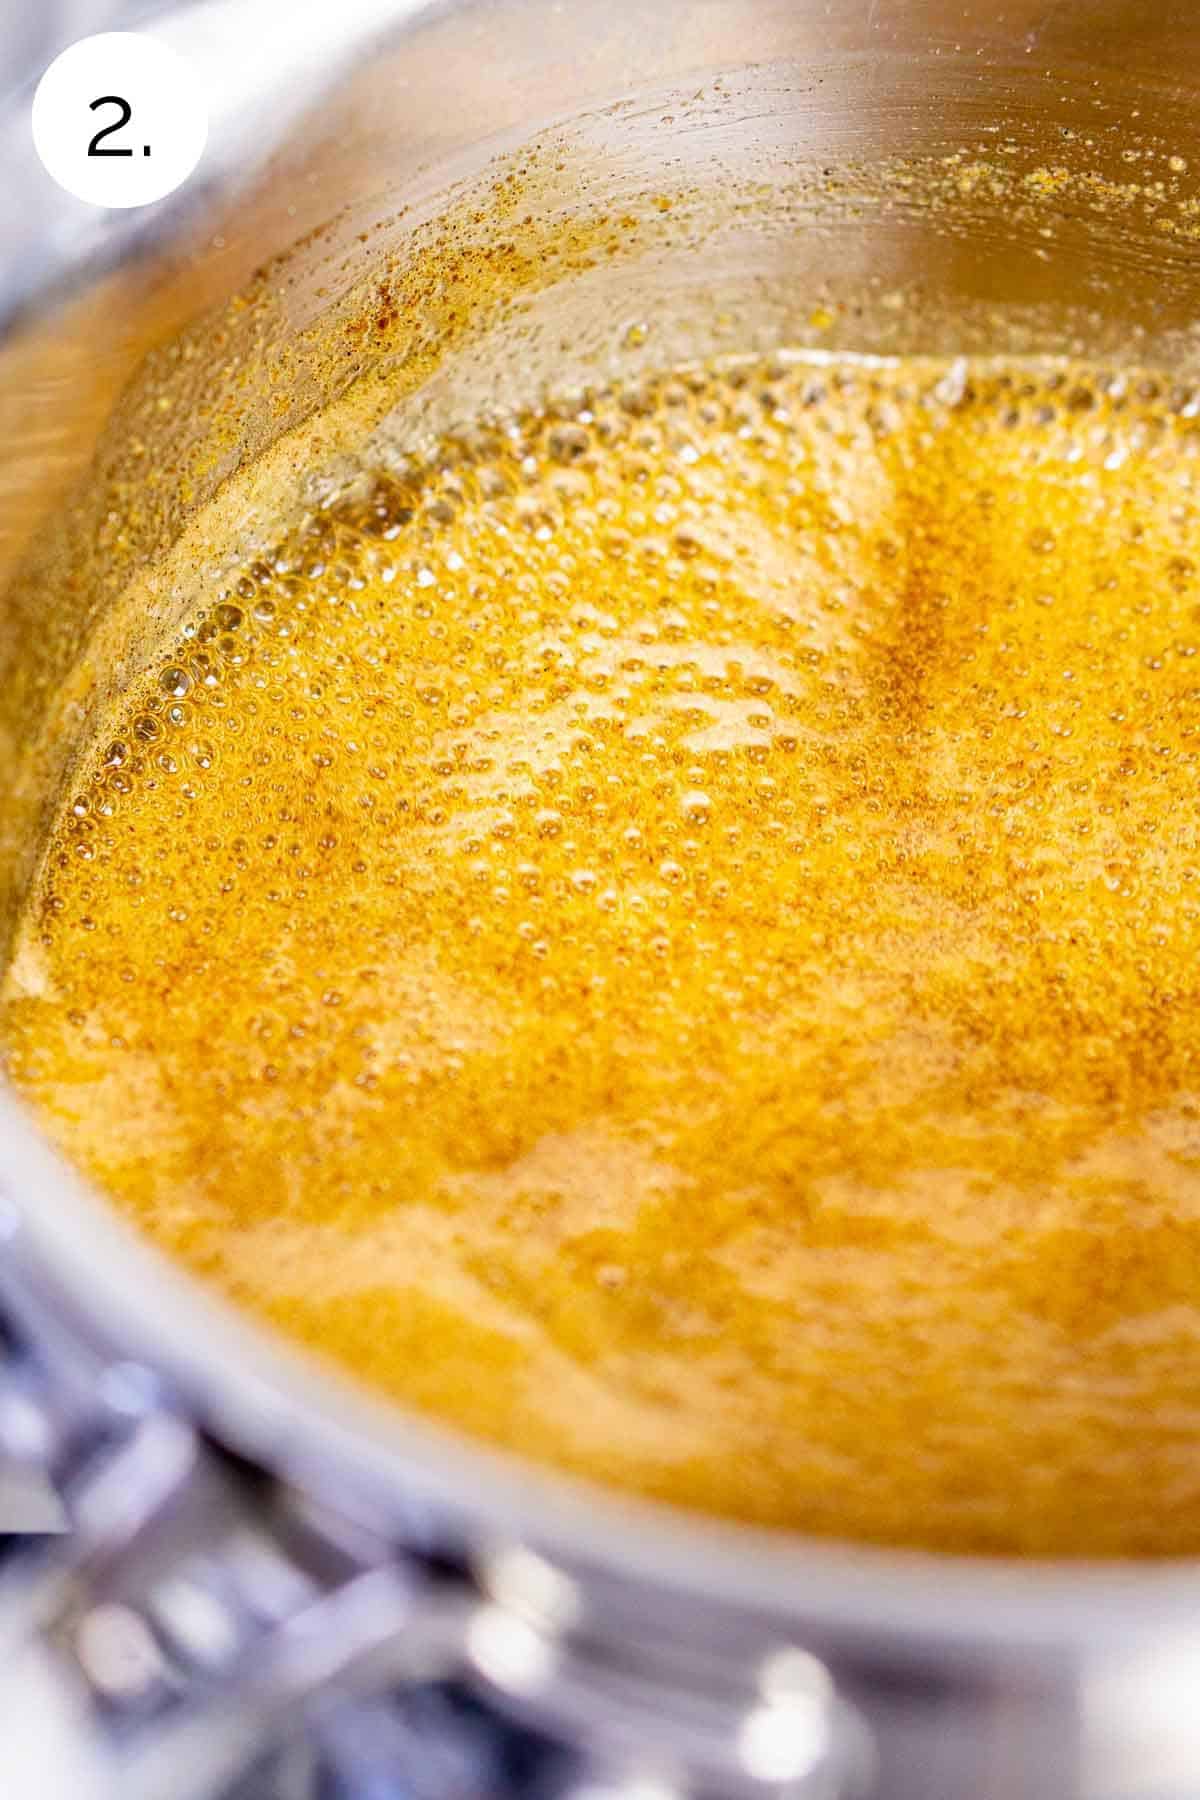 The spiced orange glaze boiling in a small stainless steel saucepan on the stove-top range.